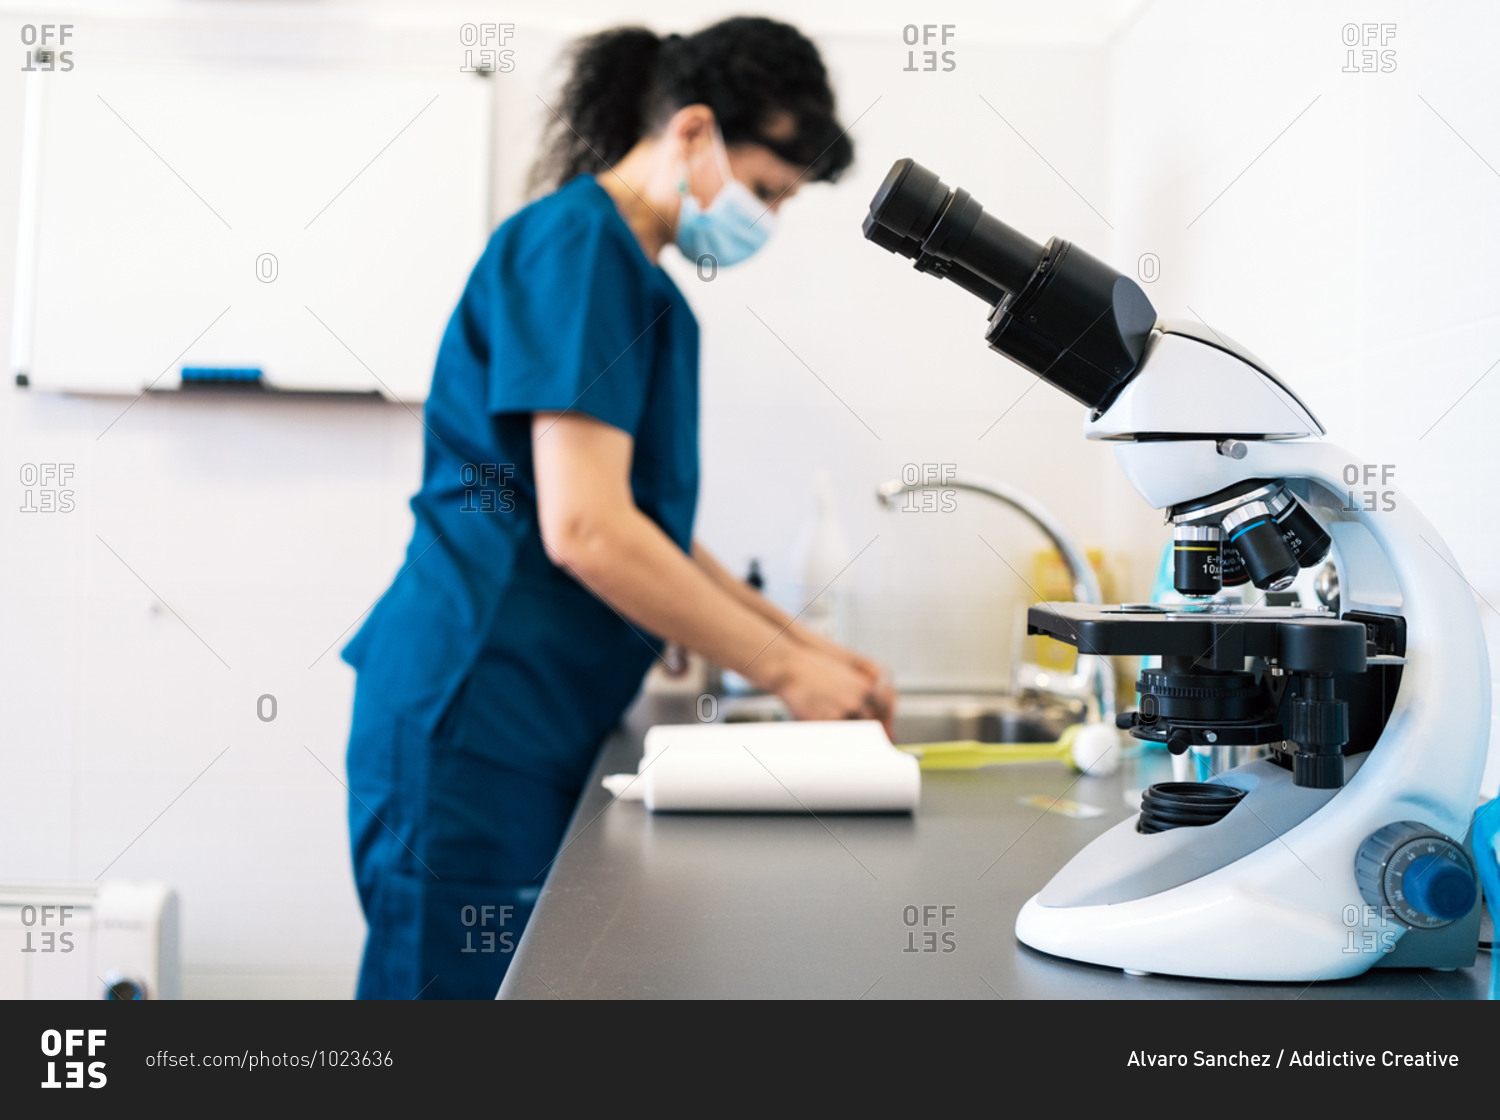 Modern microscope placed on table near female doctor in medical mask in lab of modern clinic